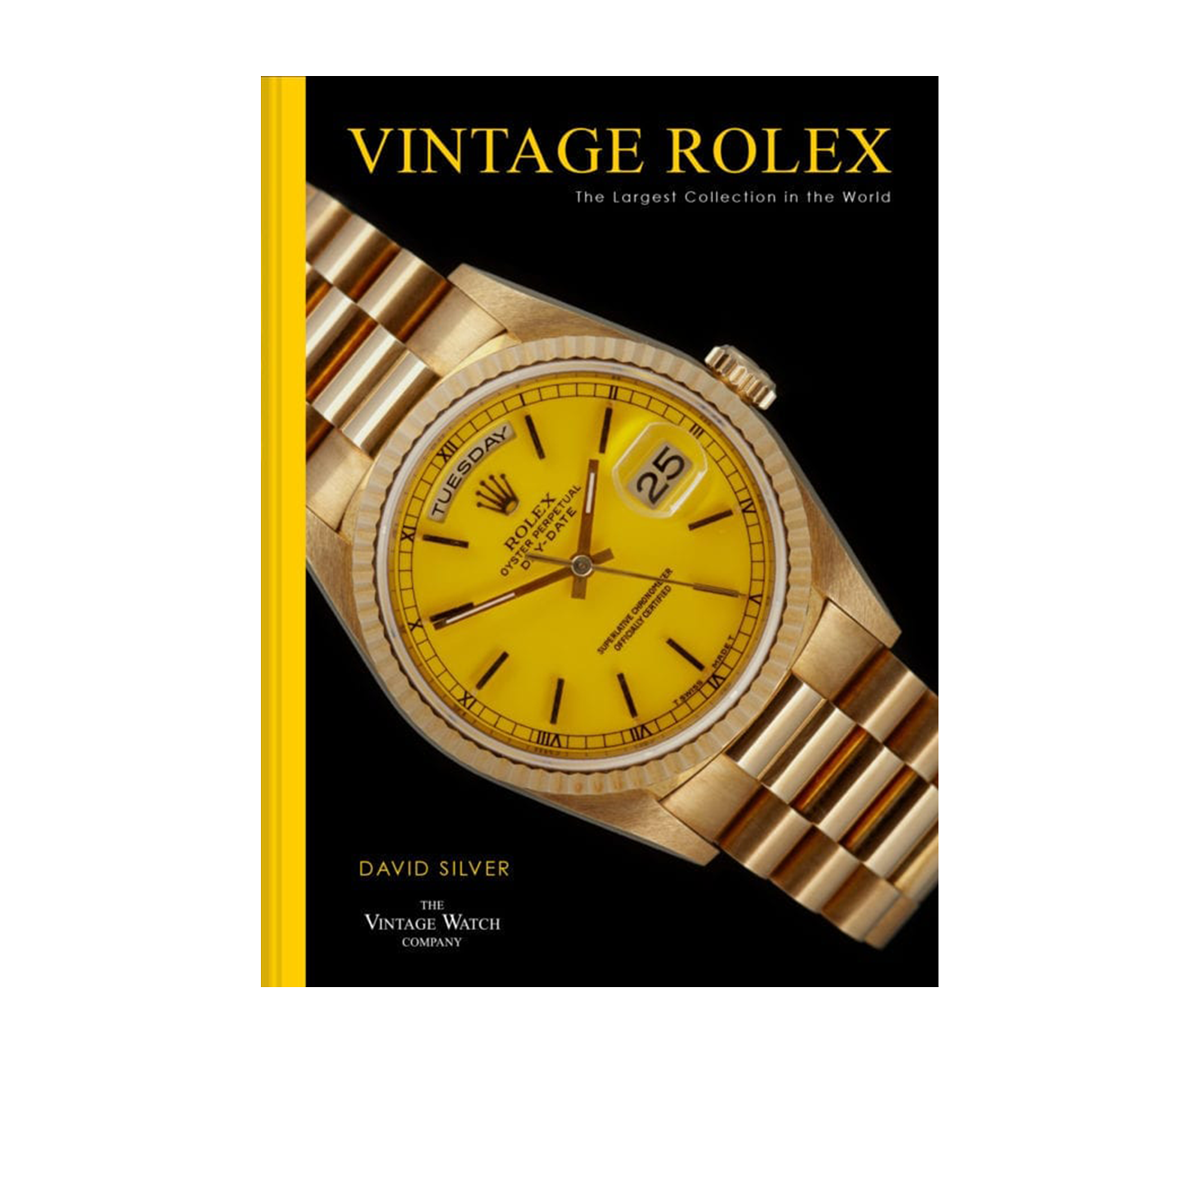 Vintage Rolex Coffee Table Book